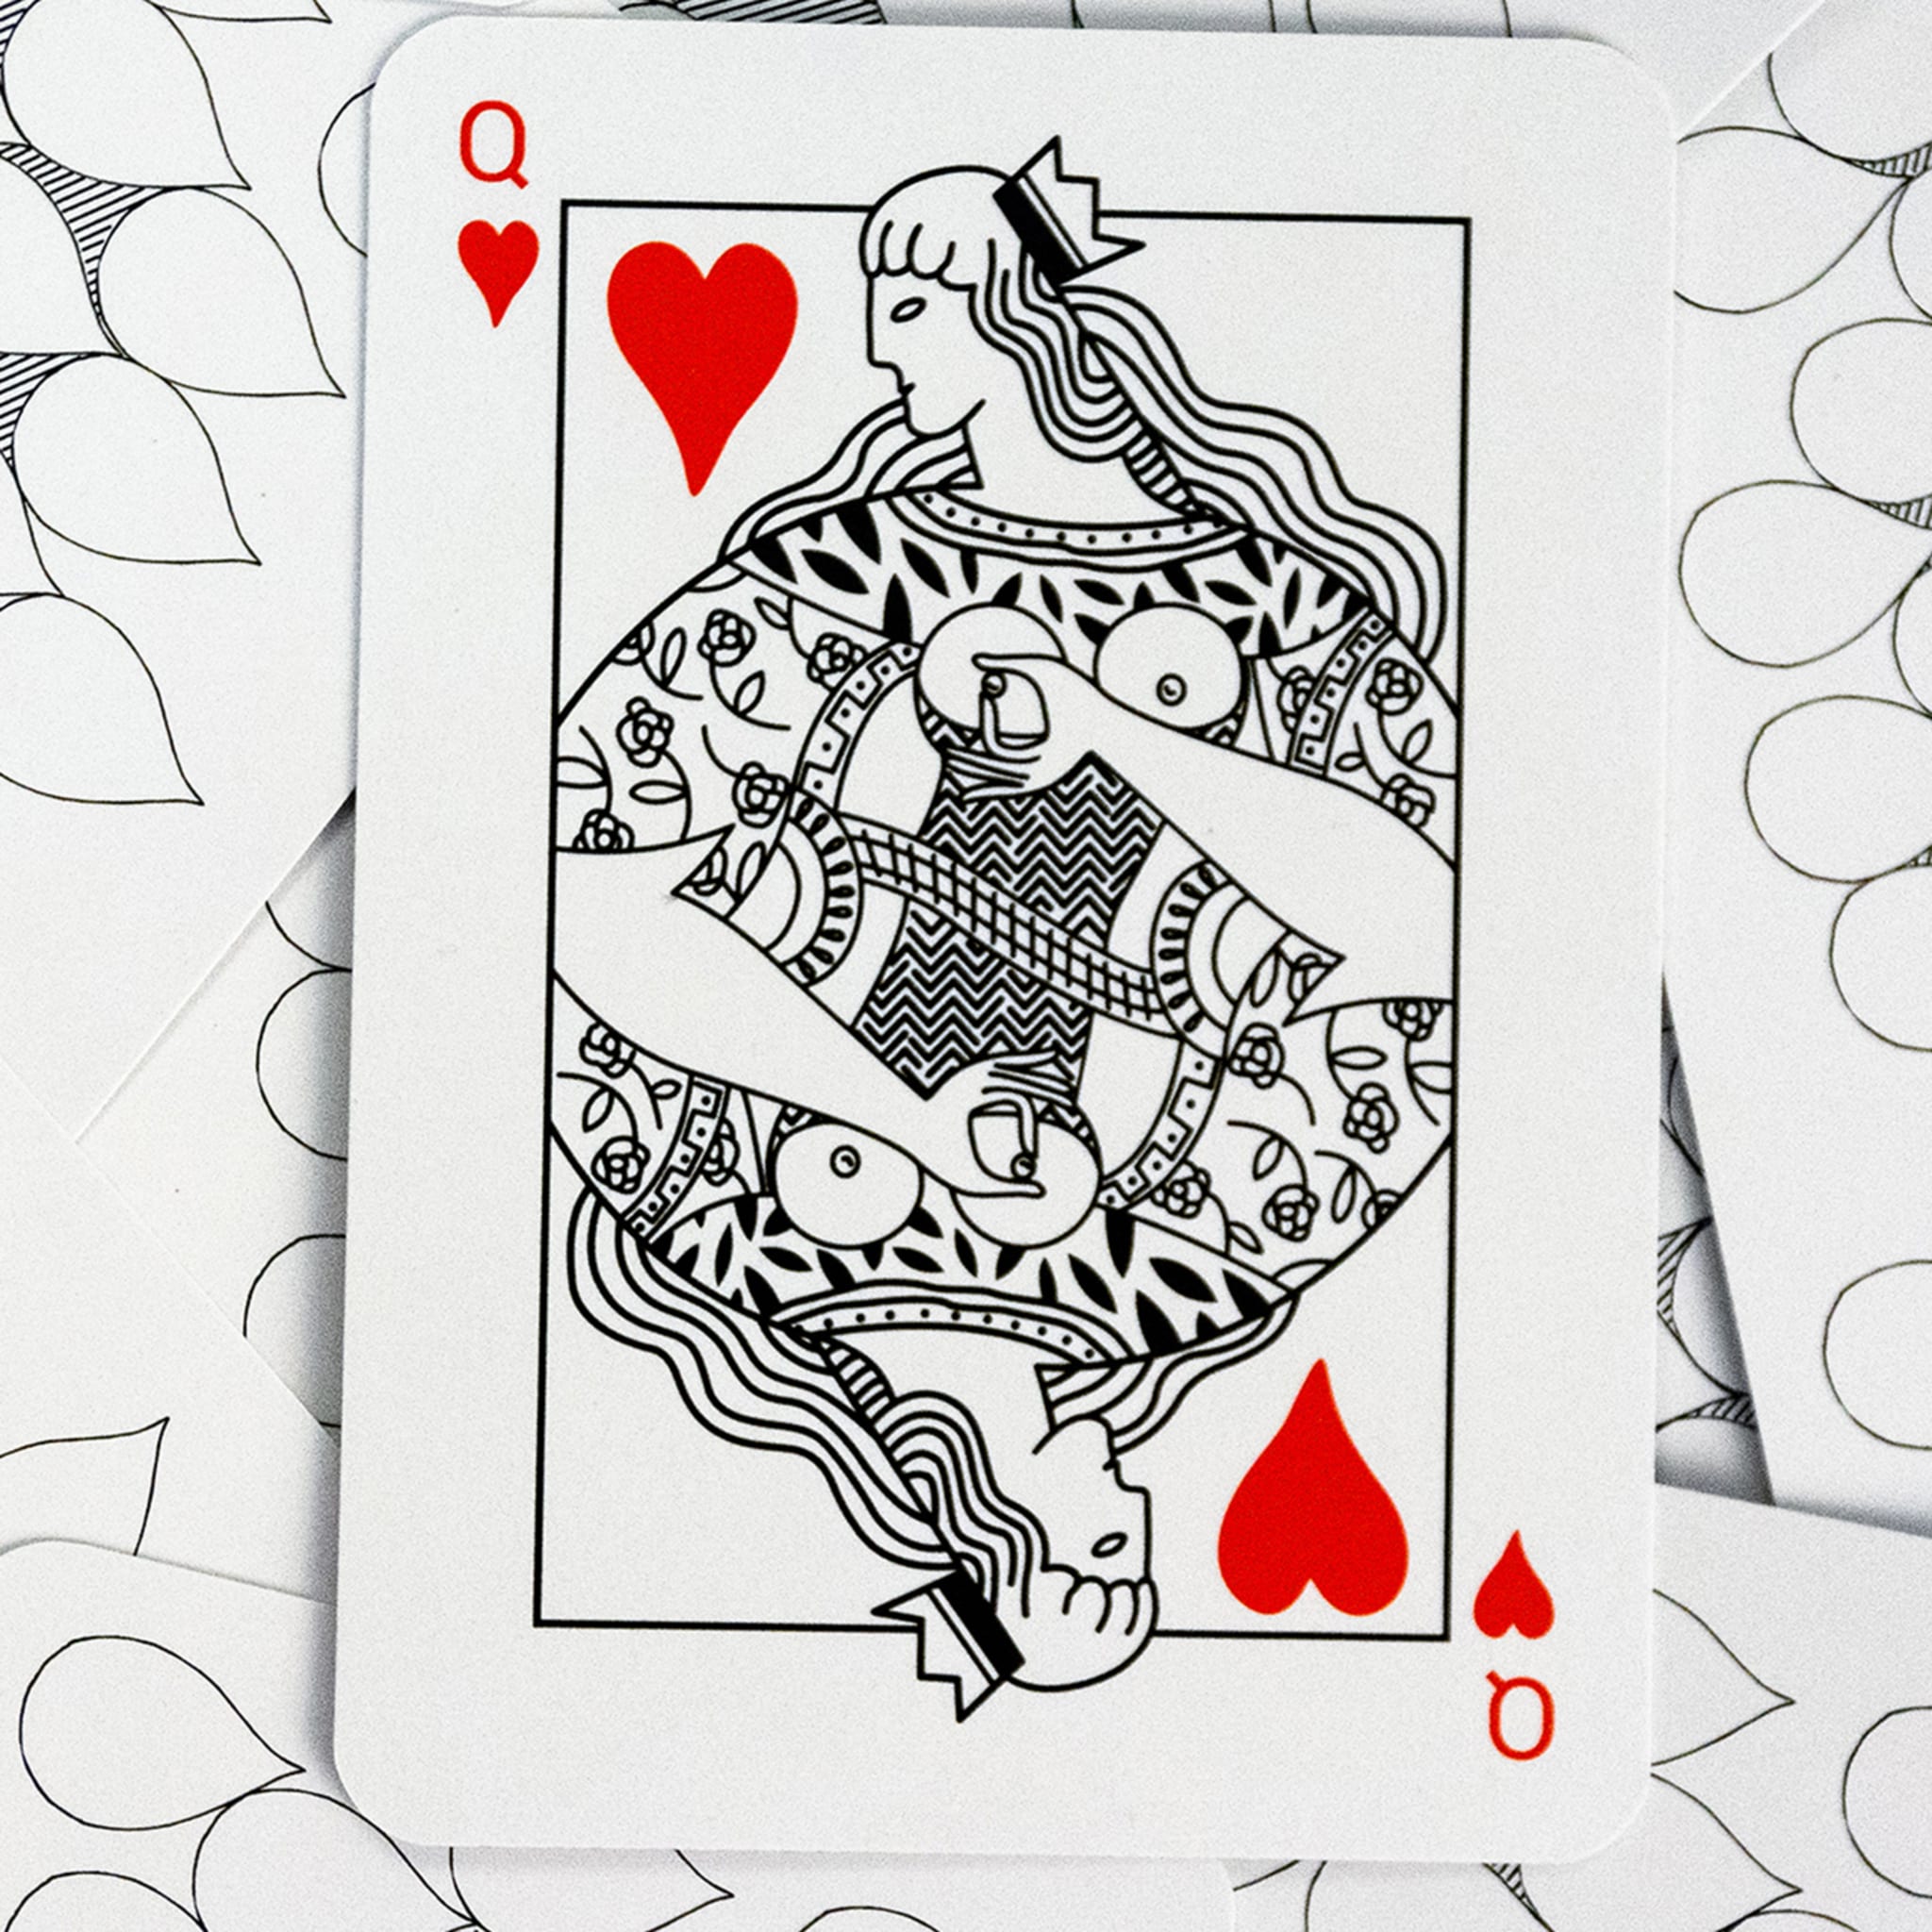 Comequandofuoripiove Playing Cards - Alternative view 5